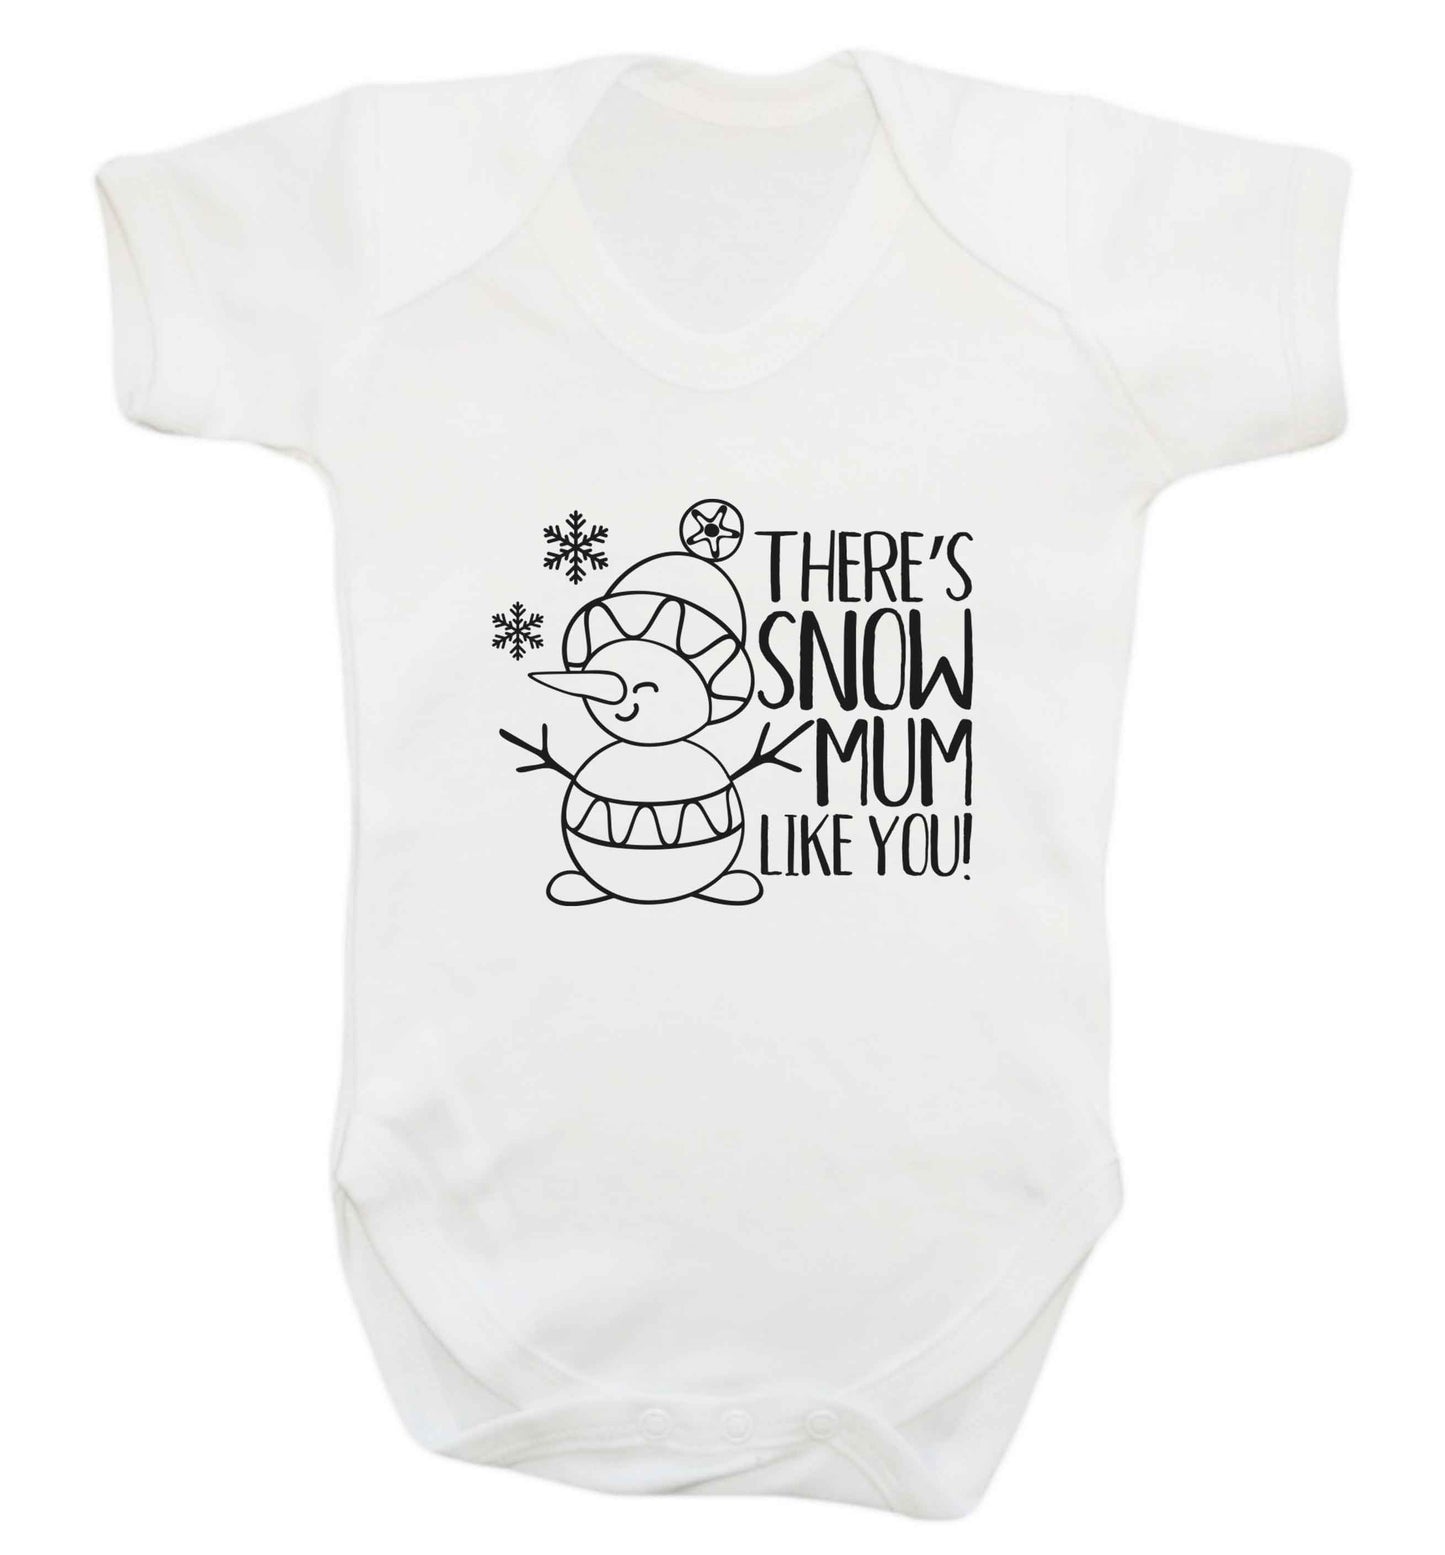 There's snow mum like you baby vest white 18-24 months